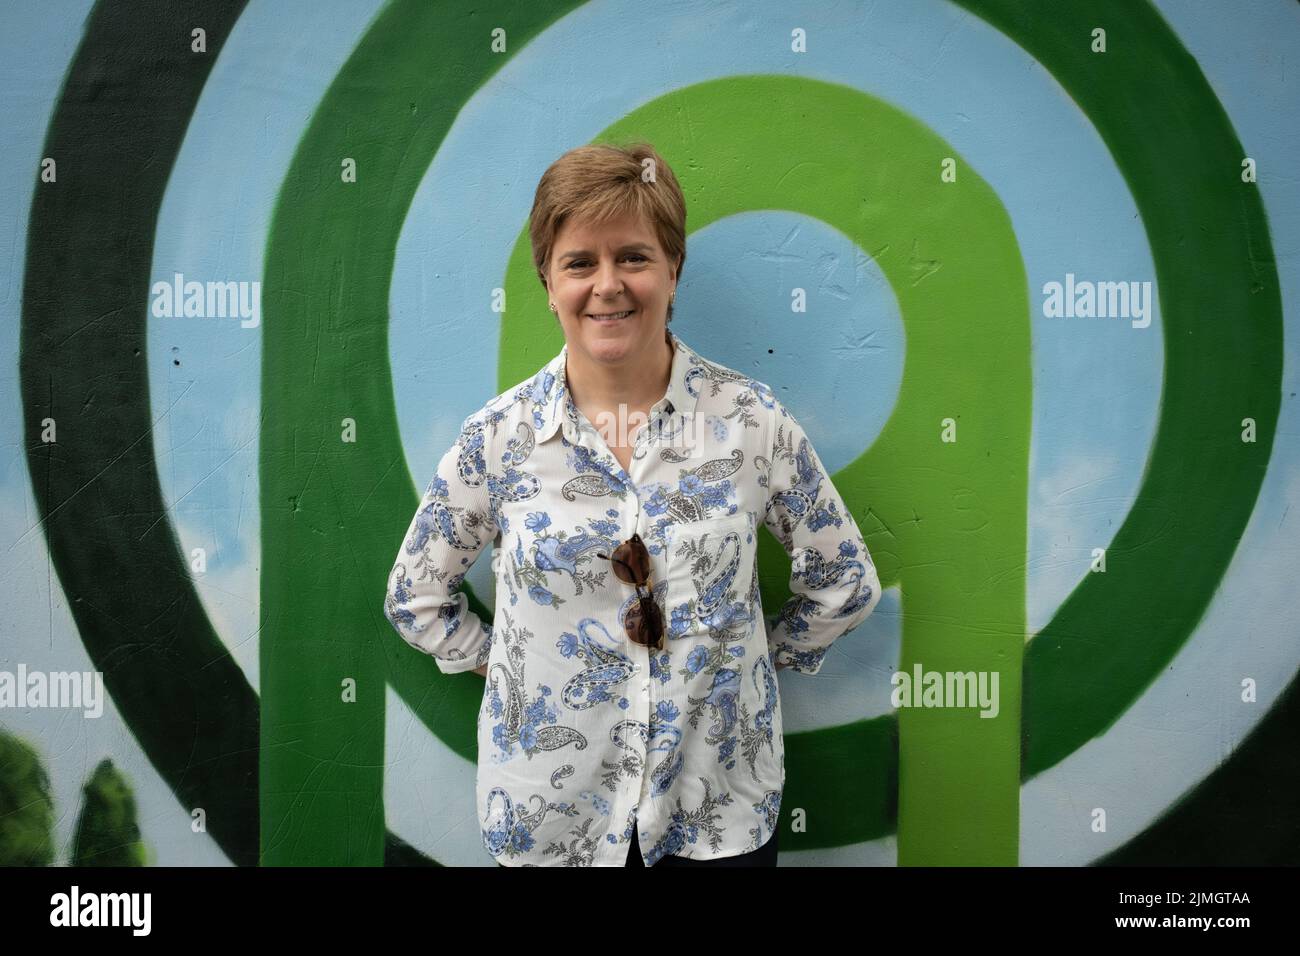 Glasgow, UK, 6th August 2022. Scottish First Minister Nicola Sturgeon made an appearance and short speech to open the Govanhill International Festival and Carnival in QueenÕs Park, in Glasgow, Scotland, 6 August 2022. Photo credit: Jeremy Sutton-Hibbert/Alamy Live News. Stock Photo